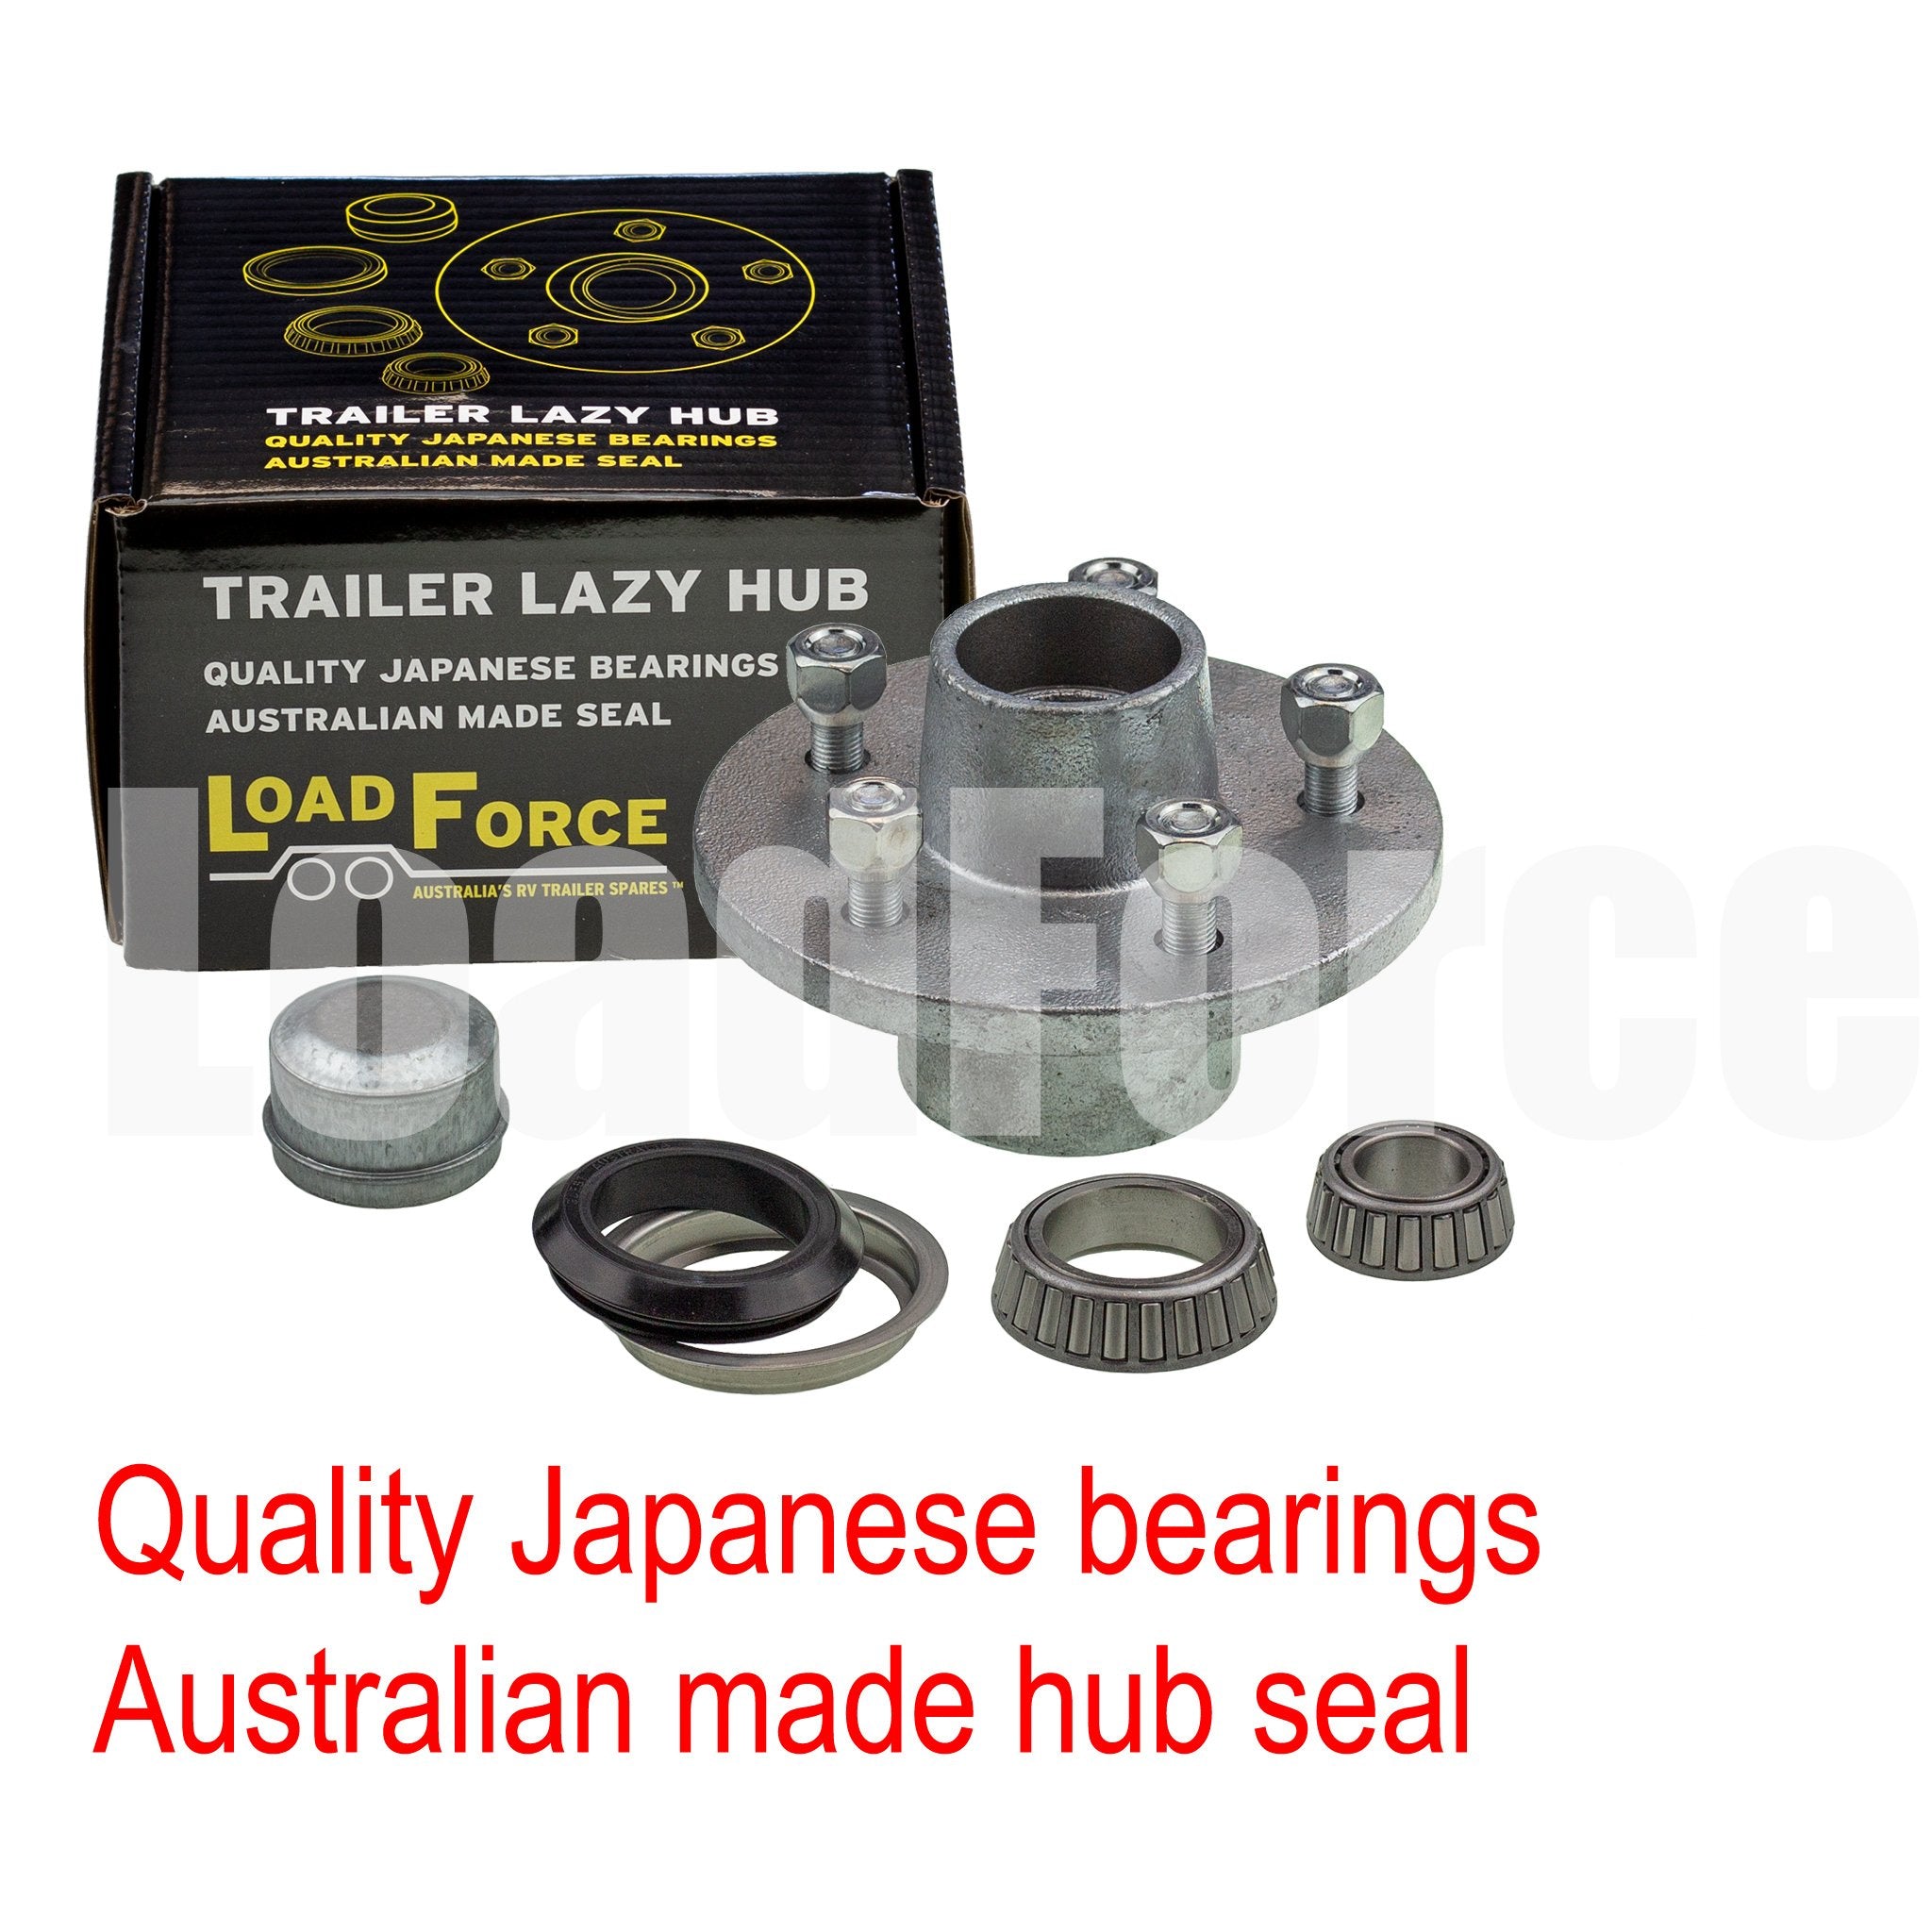 6 inch pcd ht 5 stud lm bearing lazy hub assembly galvanised